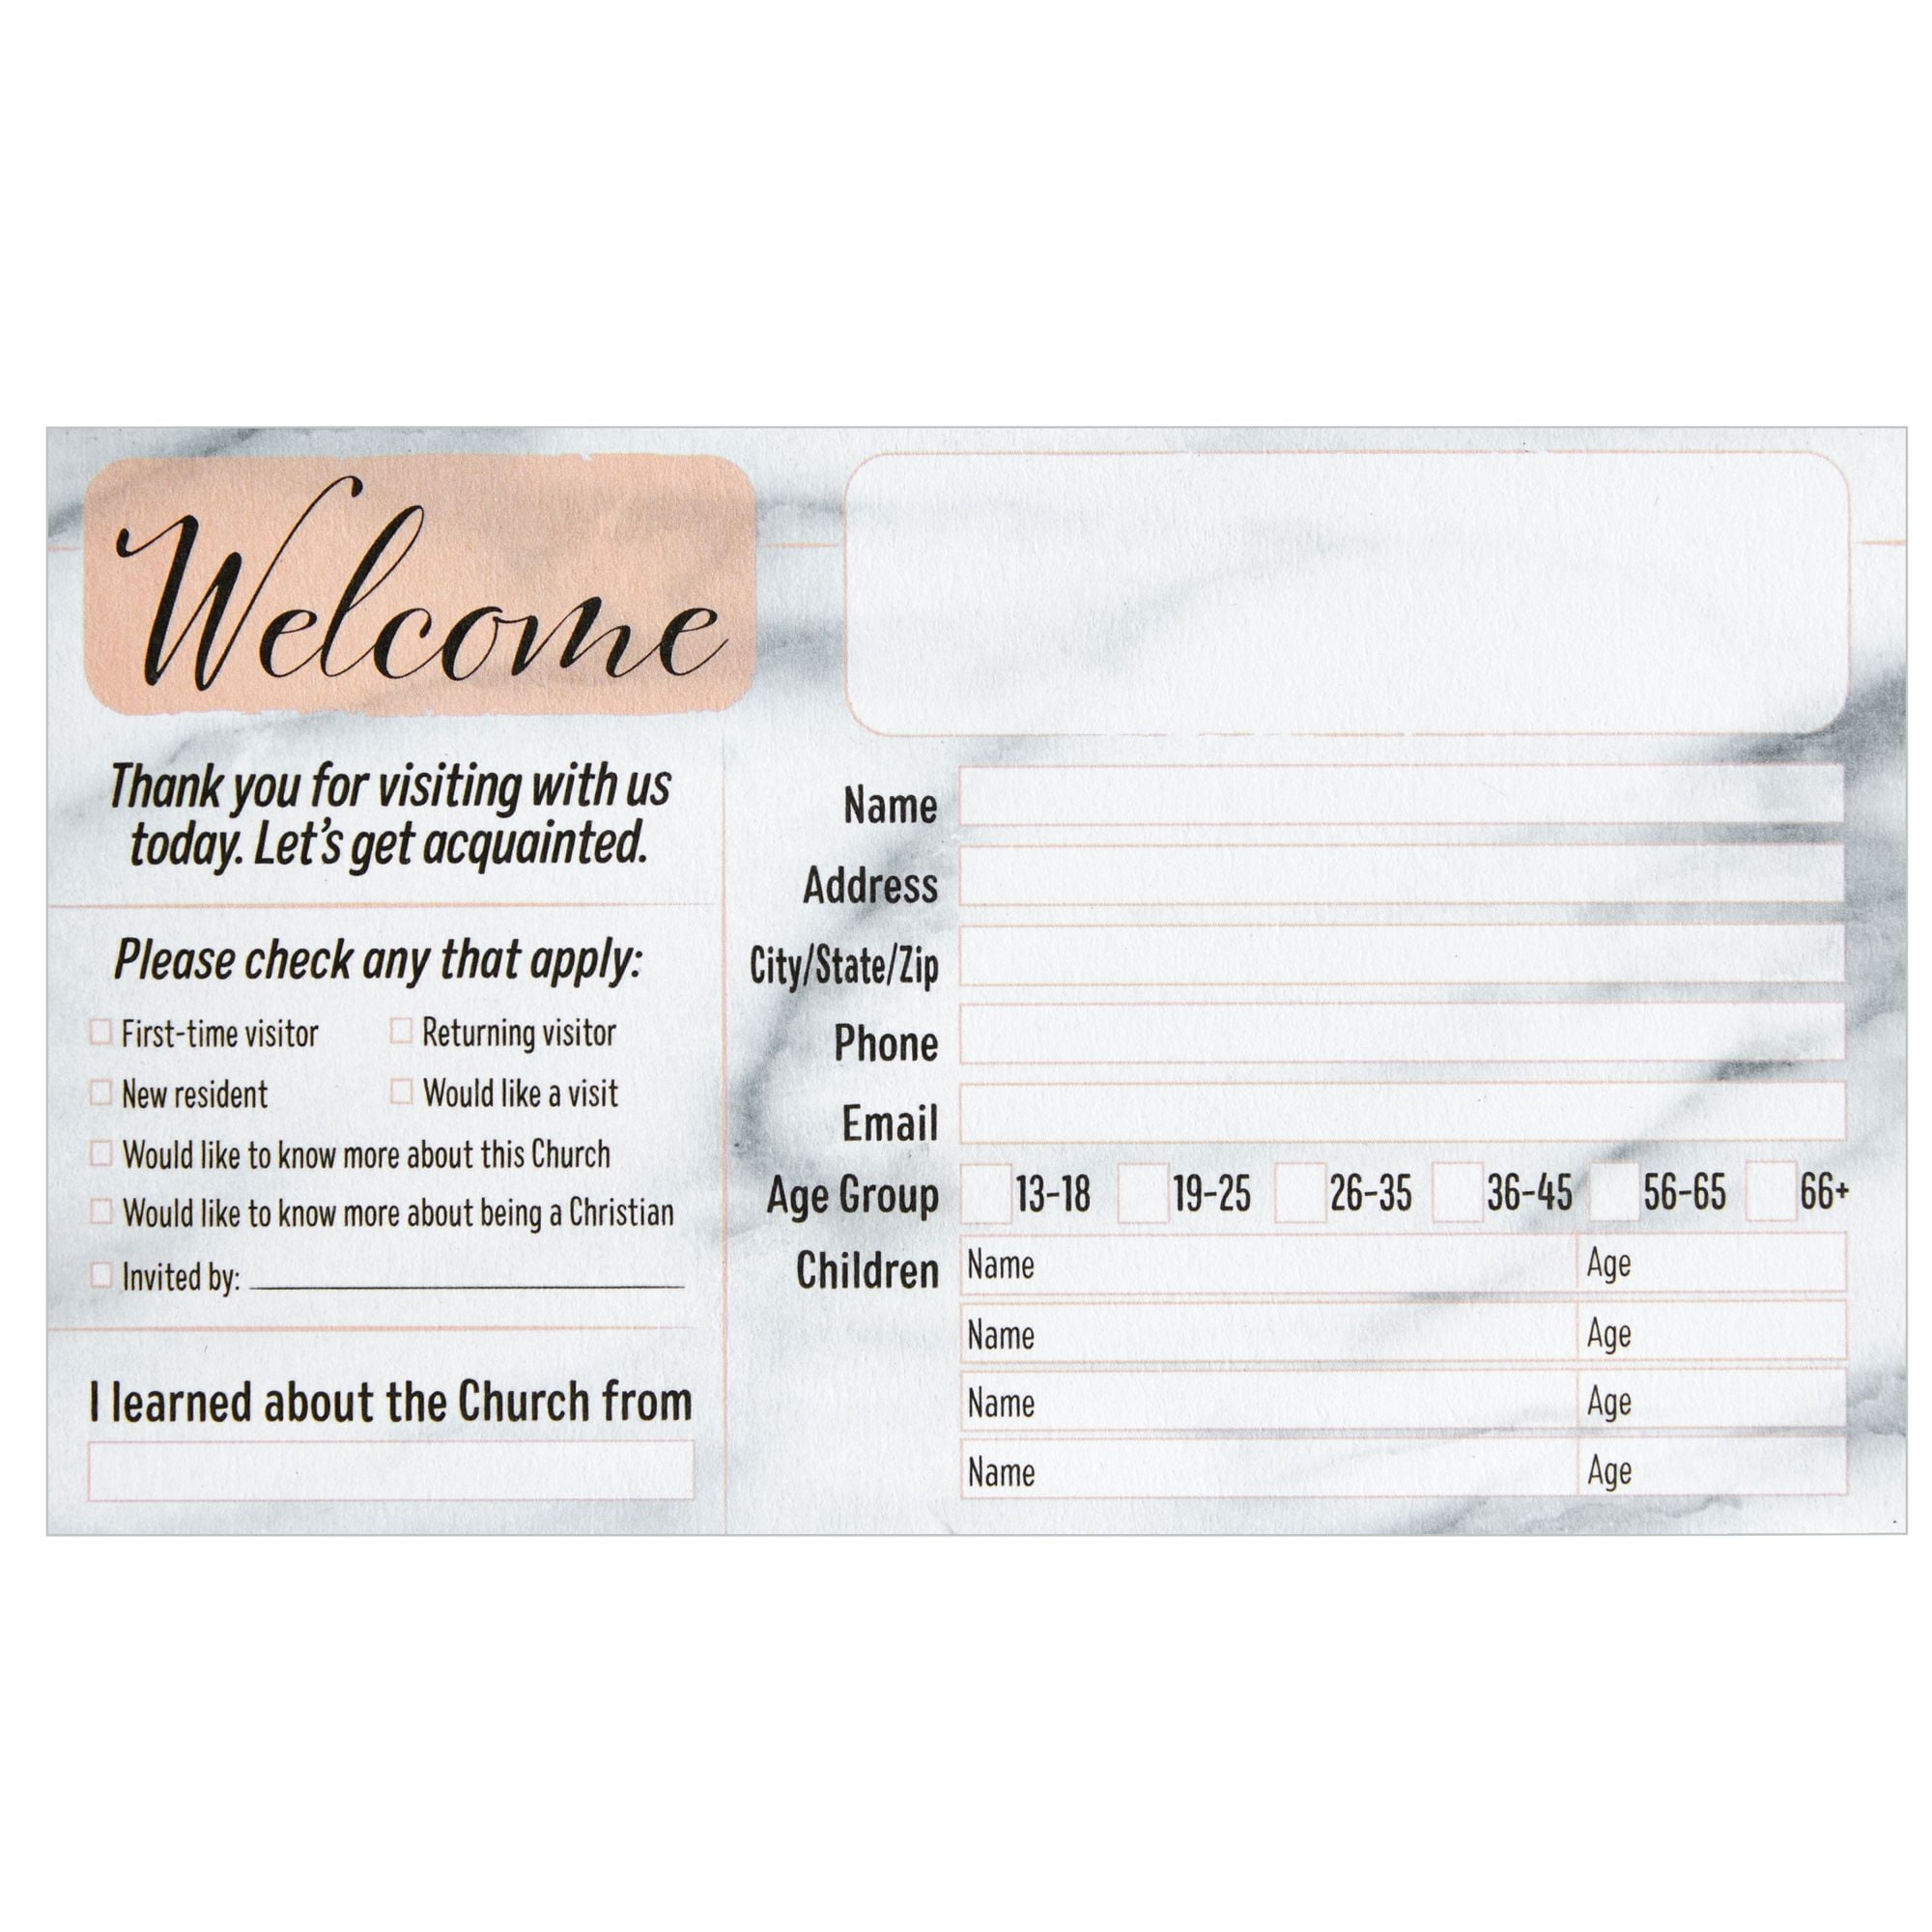 CHENGU 180 Pack Church Visitor Cards 3 x 5 Inch Church Welcome Cards Prayer  Cards Decorative Eucalyptus Prayer Request Cards Prayer Request Note Cards